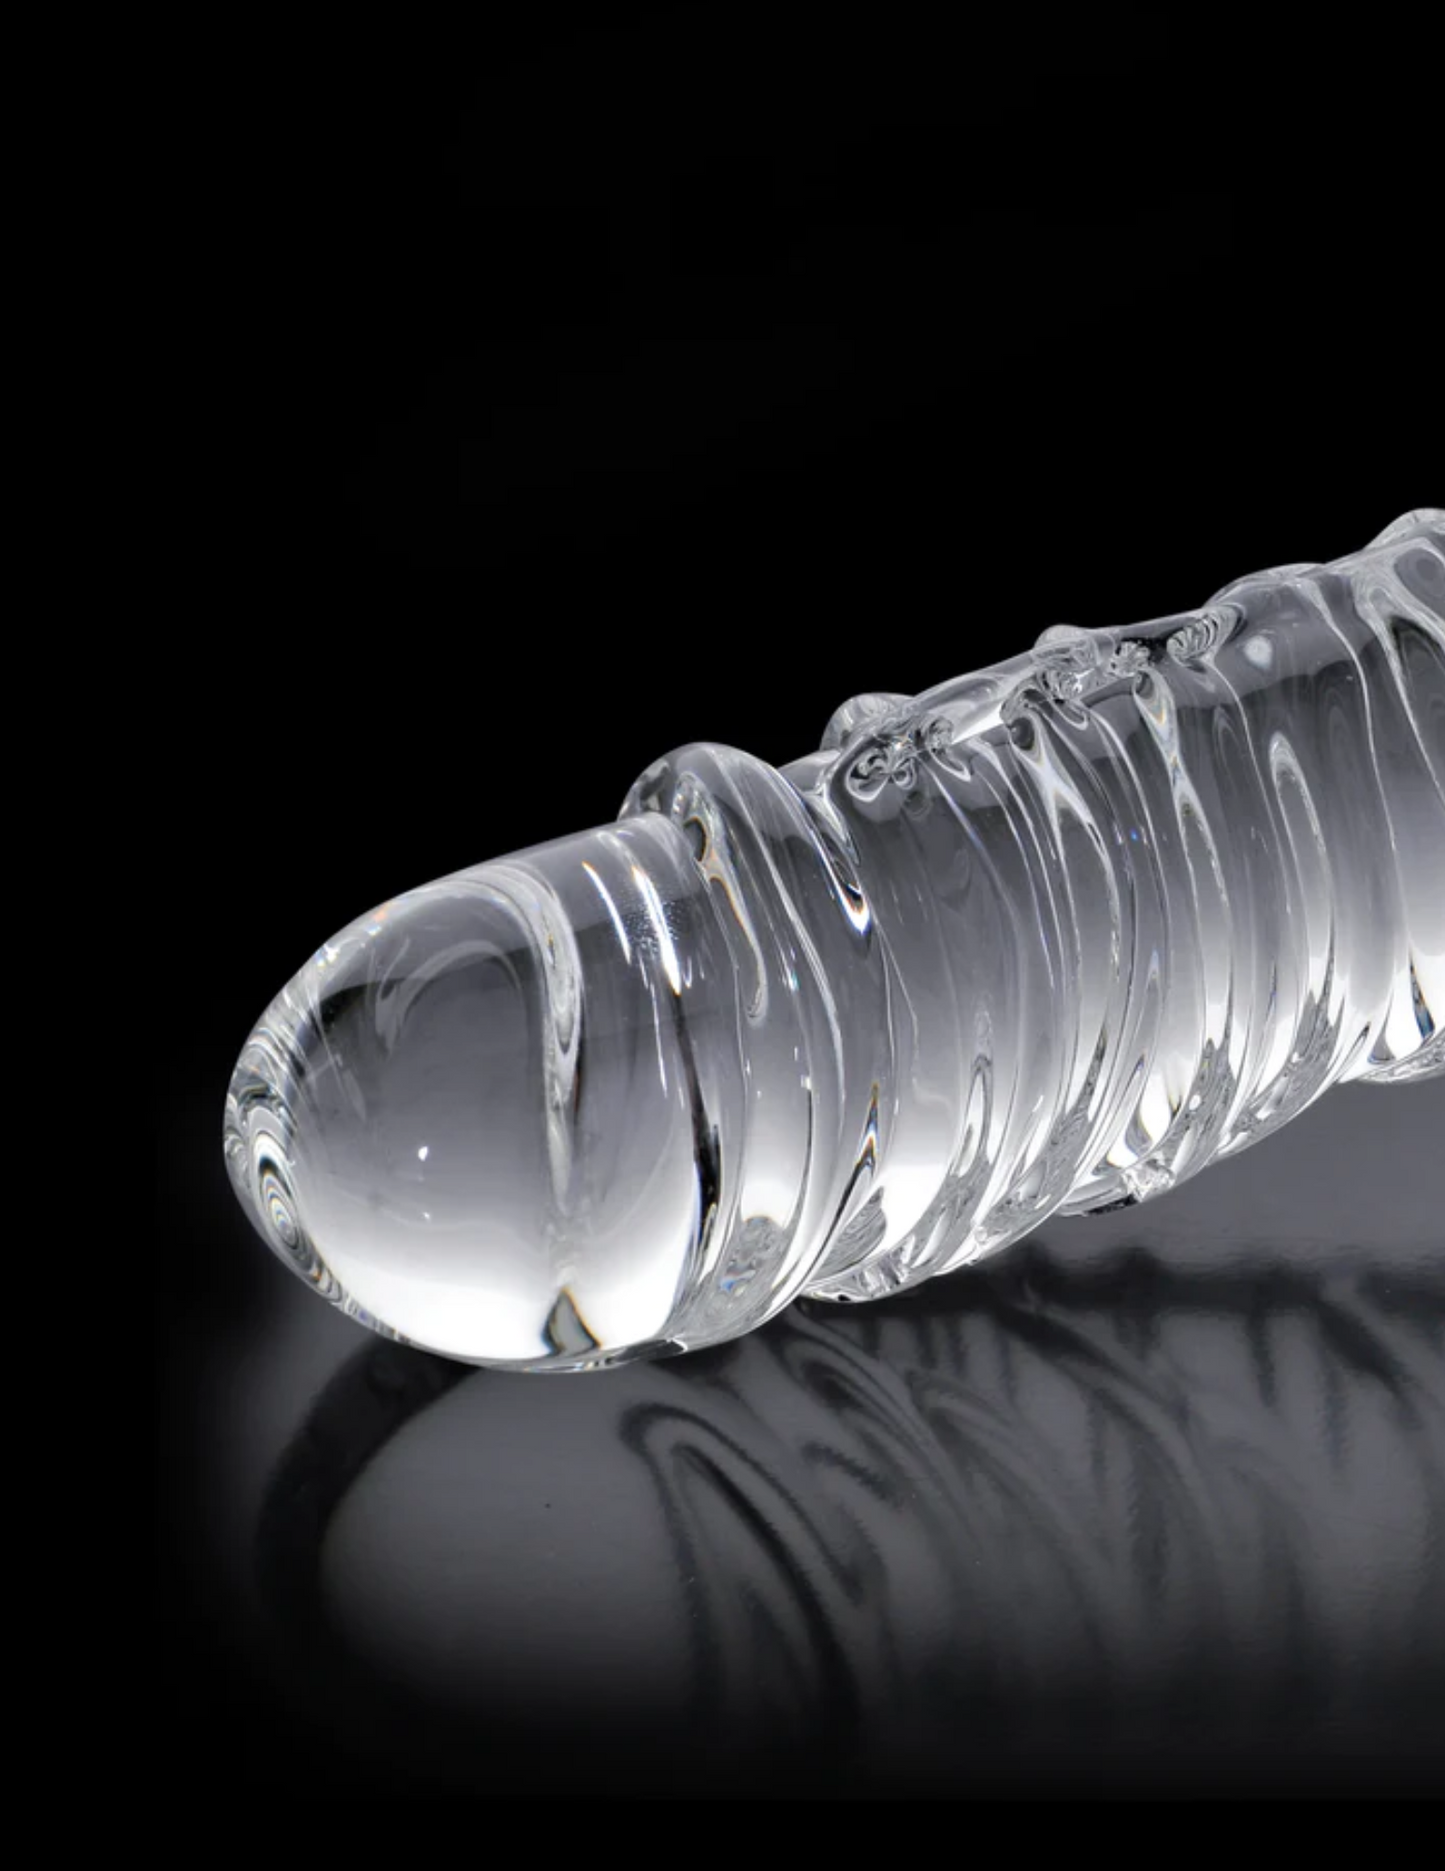 Close-up of the No. 63 Textured Glass Dildo w/ Balls from Pipedreams (clear) shows the head and swirled texture of the massager.